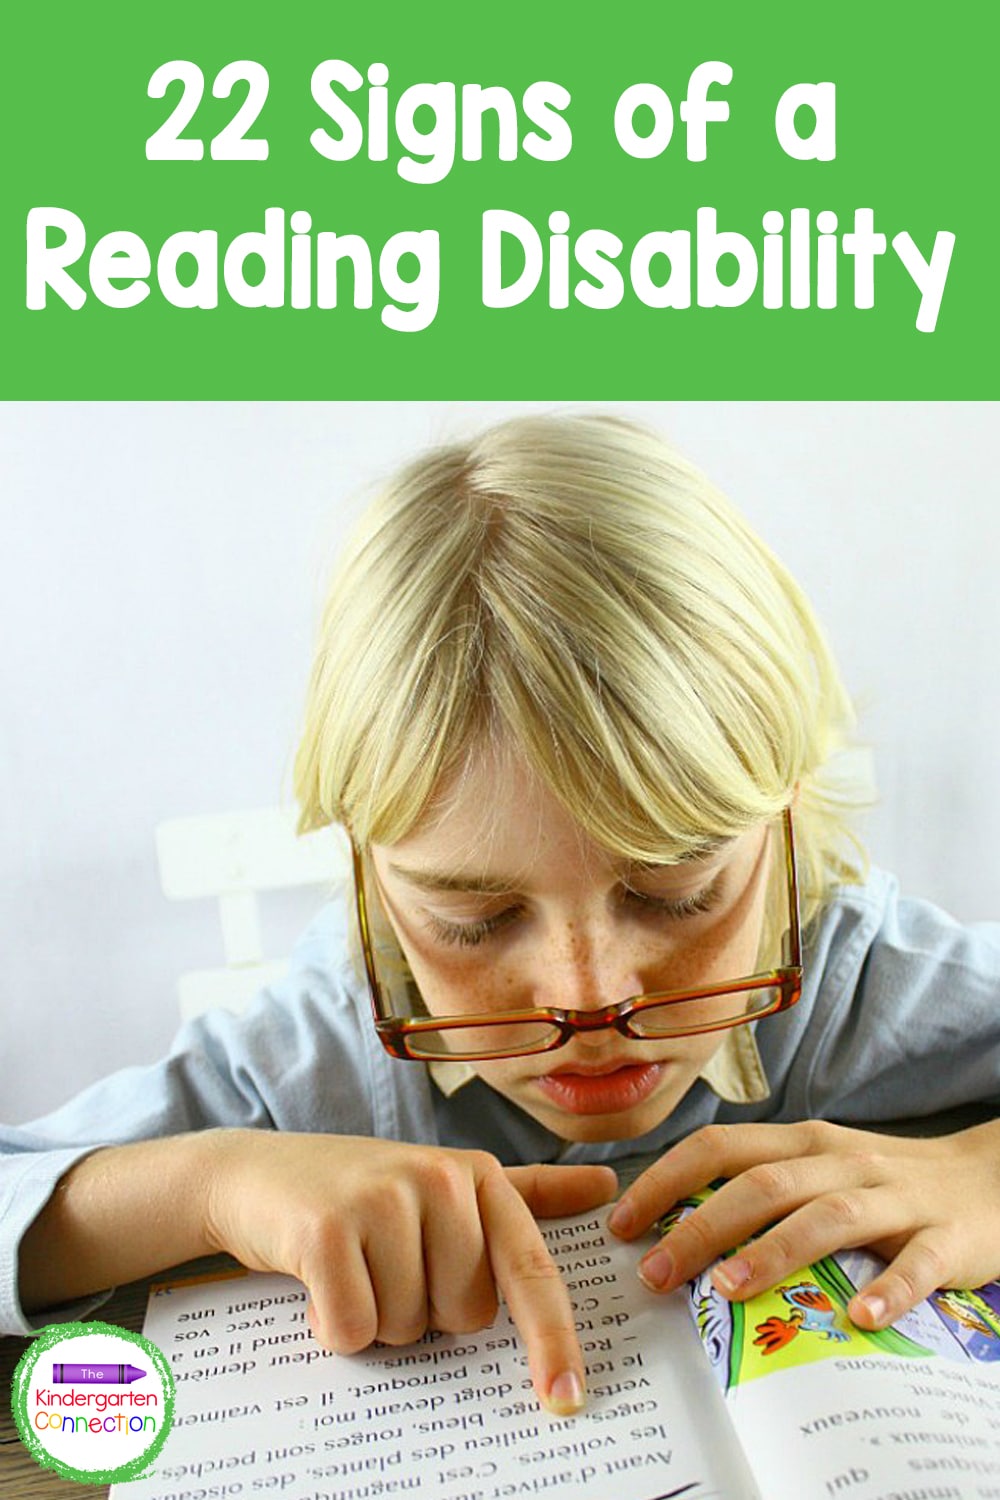 22-Signs-of-a-Reading-Disability